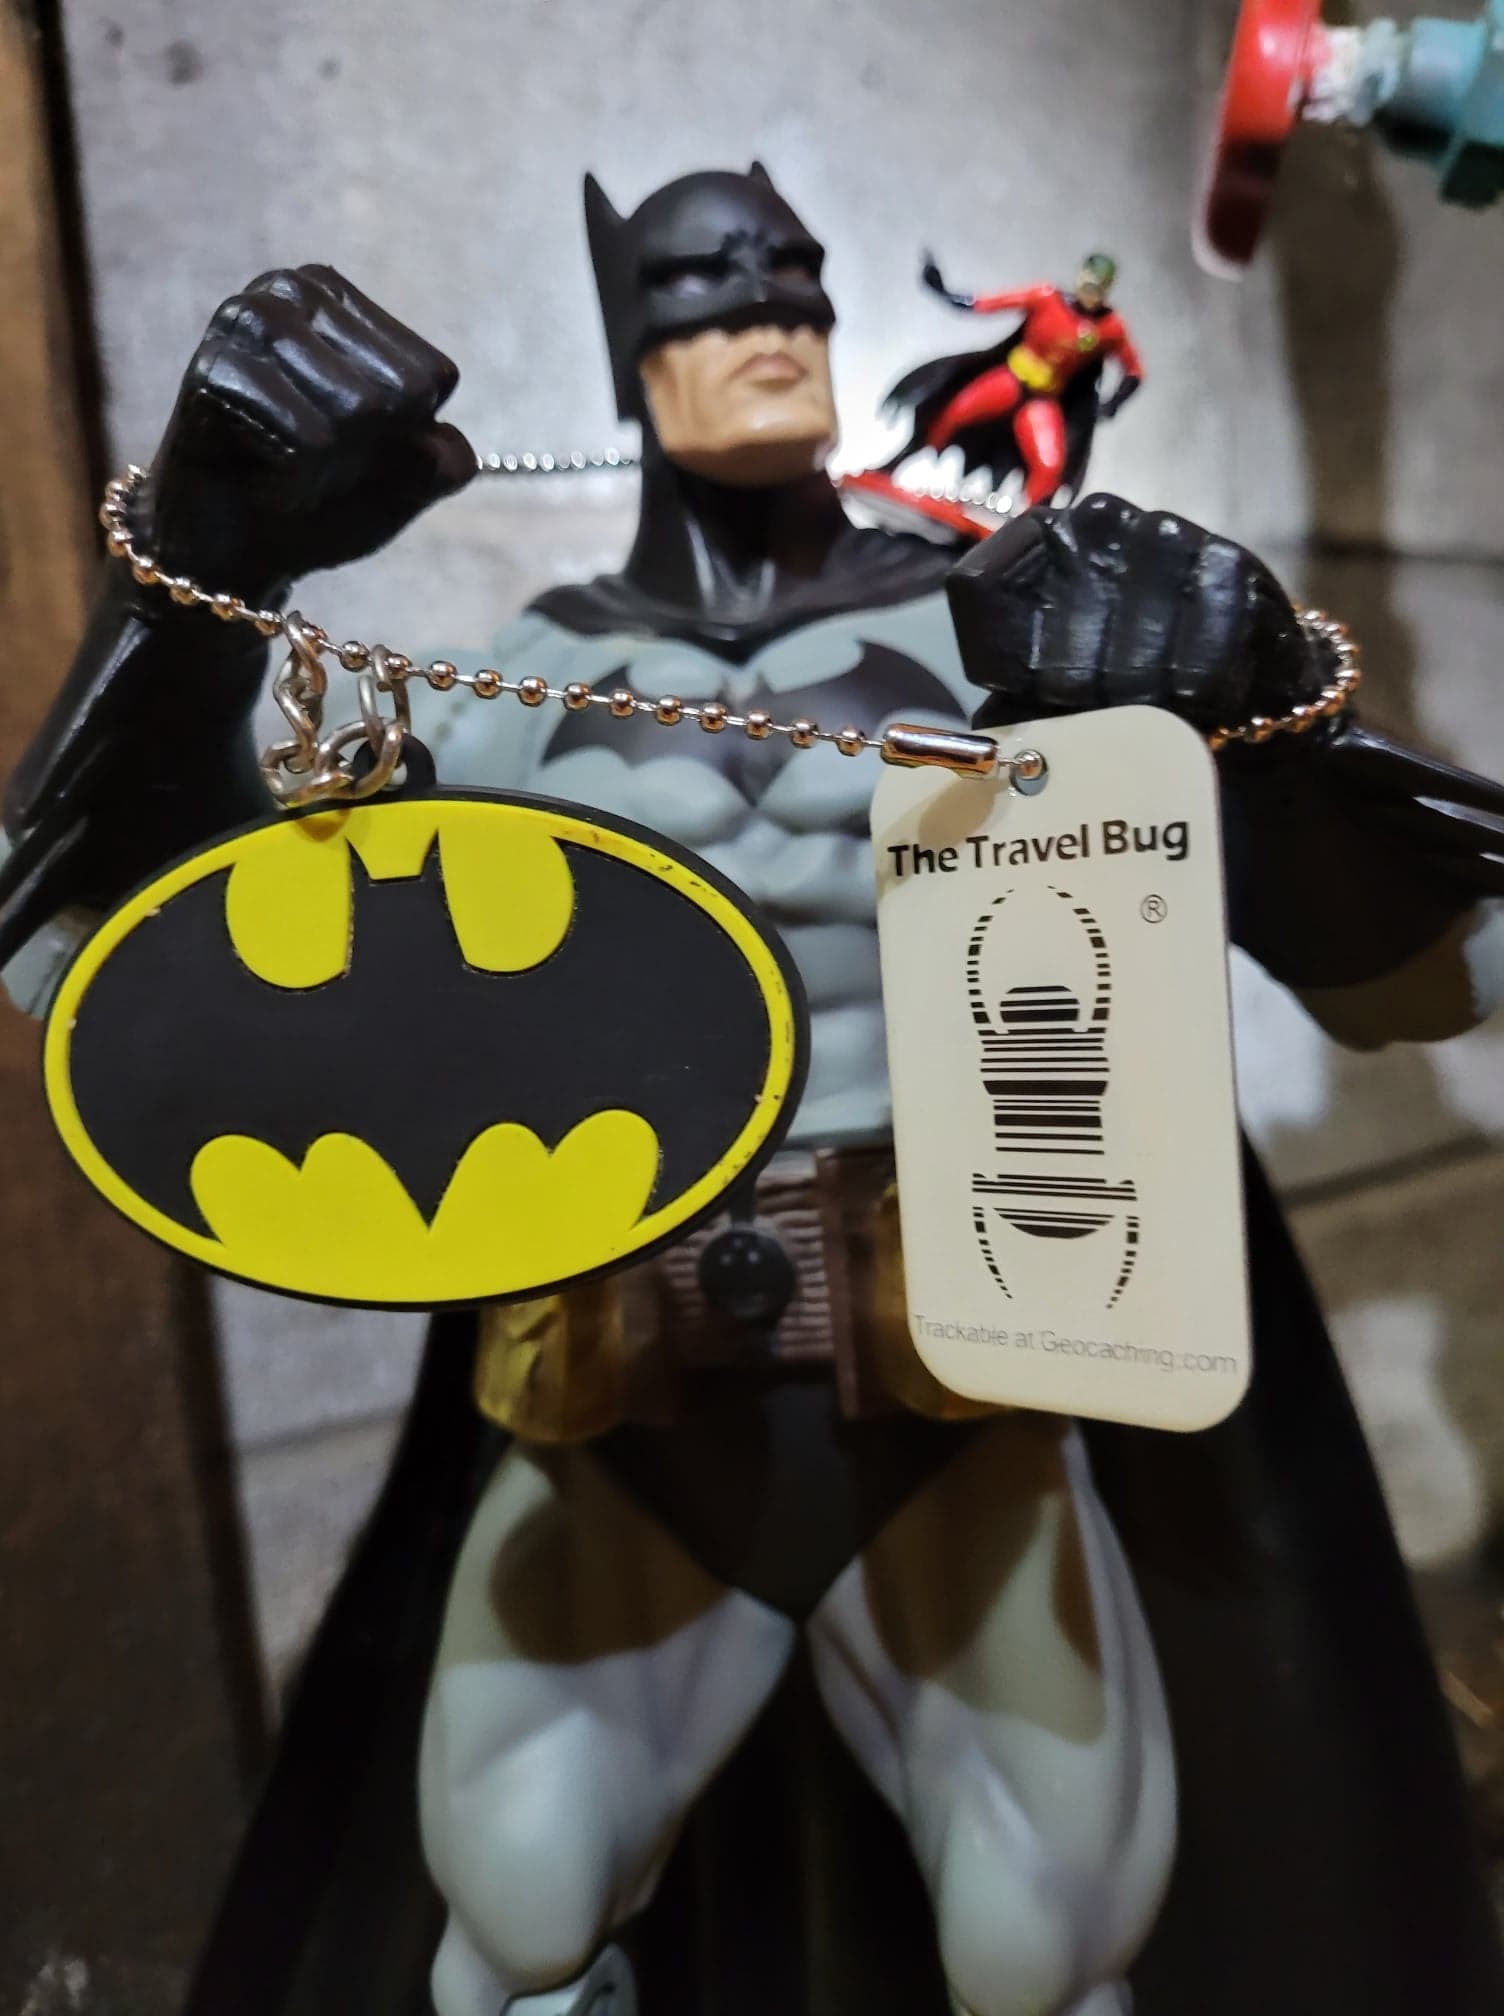 This TRACKABLE is a Glow-in-the-Dark Travel Bug.  It glows a greenish color in the dark after being exposed to light.  I attached a small one and a half inch Robin figure, Batman’s side-kick.  Robin has a standing pad connected to his feet.  I threaded the chain from the Trackable Travel Bug between Robin’s legs to attach him to the trackable.   I also attached the Trackable's chain to a Bat Emblem Keychain that is rubber, and has a short chain on top.  This Bat Emblem is an oval about two inch tall and about three inches wide. The rubber emblem is about one eighth inch thick.  The Bat Emblem has a Yellow background with a Black Bat filling the center to the edges.   My son has a Batman posable figure that is about eleven inches tall.  I posed the Robin figure on Batman’s Left shoulder, with the chain of the trackable around Batman’s neck.  Batman is posed with his two fists up in a fighting position.  He has the chain of the Trackable around both fists, with the Bat Emblem hanging from his Right fist, and the Tracking Bug hanging from his Left fist.   I took their photo in our basement, with a cinder block wall in the background, next to pipes and a red valve.  I shined a flashlight beam behind Batman on the wall, so that Batman and the three parts of the Trackable would appear illuminated in the foreground with the light behind them.  I took the photo from below Batman’s waist, looking up so he would look big.  This effect was also to simulate Batman and the ensemble attached to the Trackable as if they were in a back alley or chemical plant with dramatic lighting.   